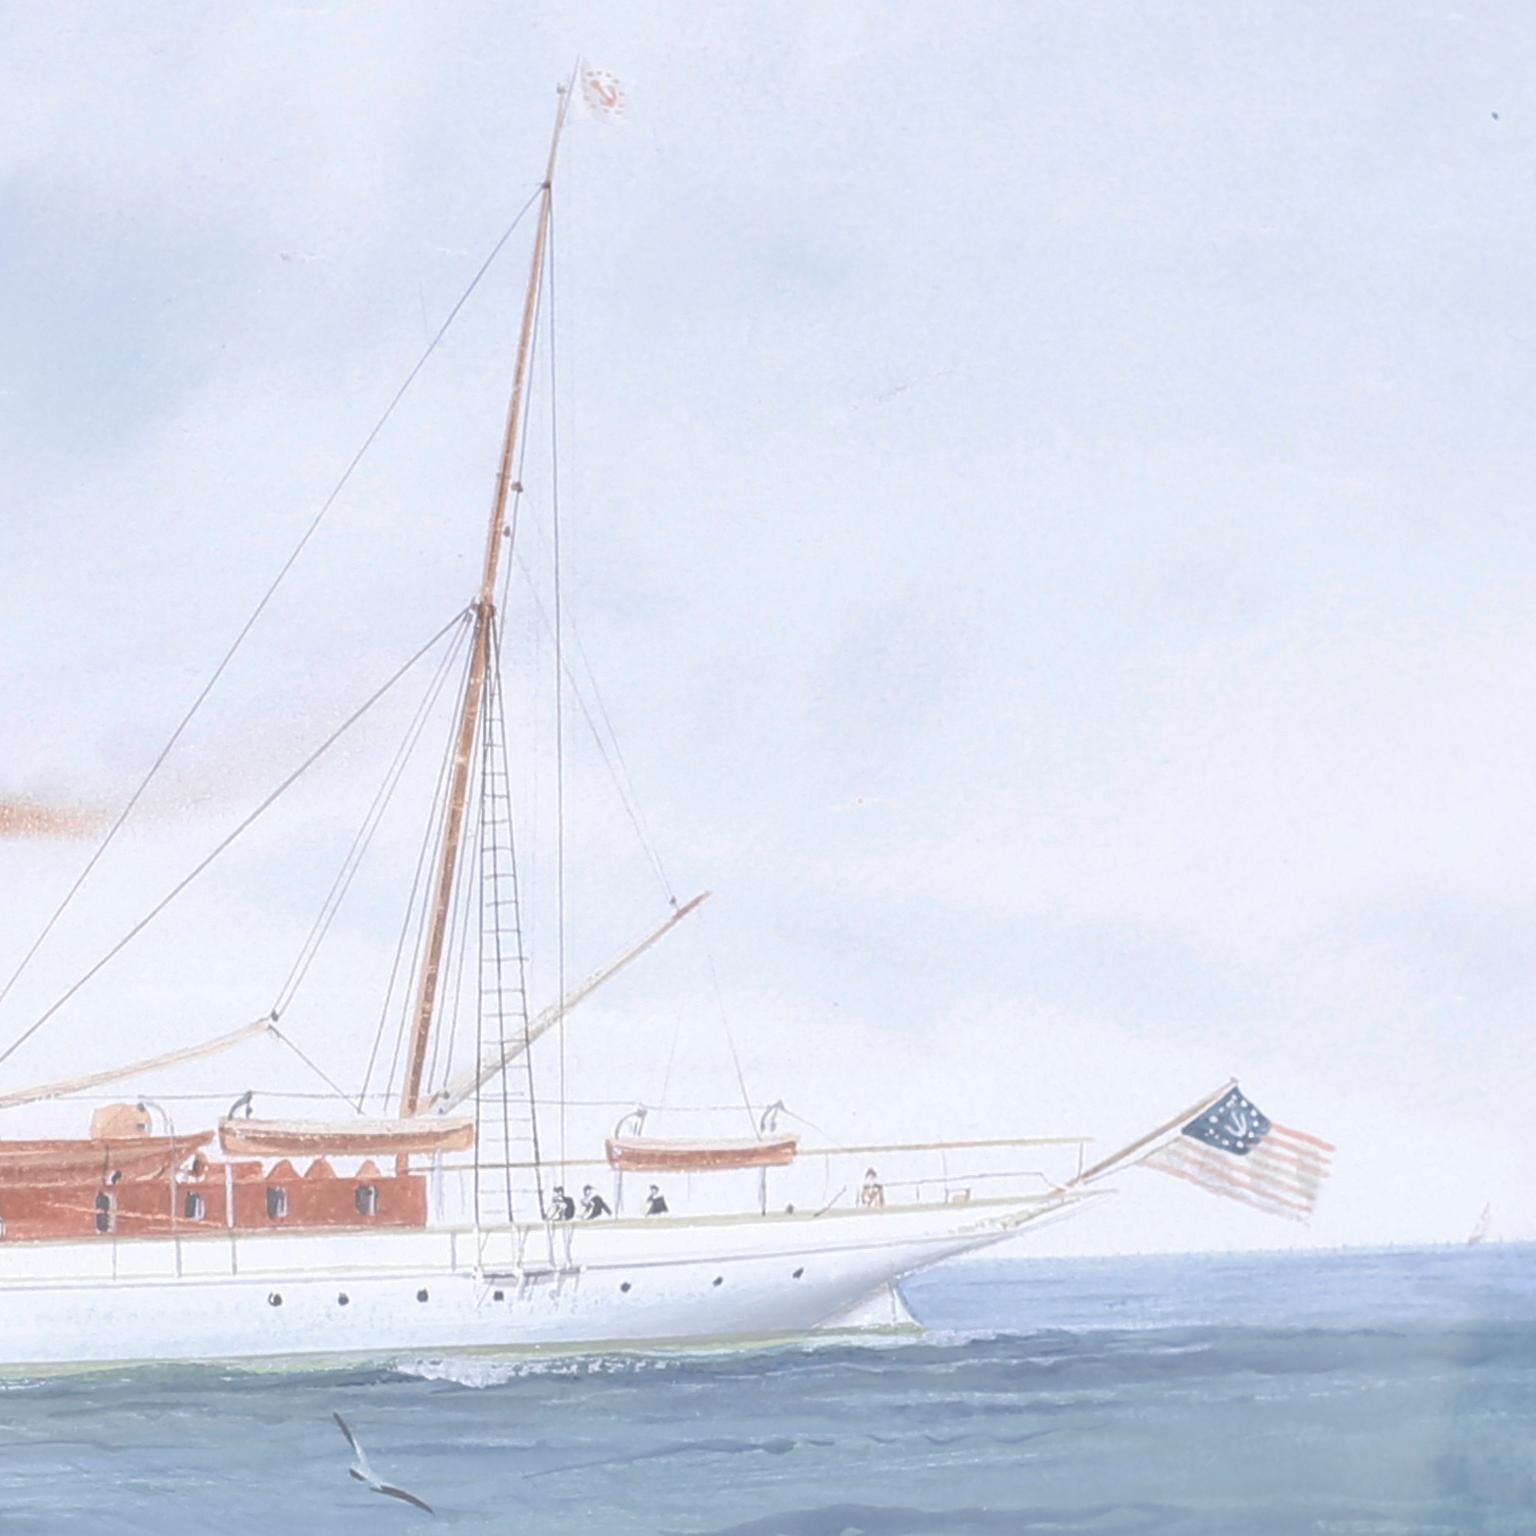 American Gouache Painting on Paper of a Yacht